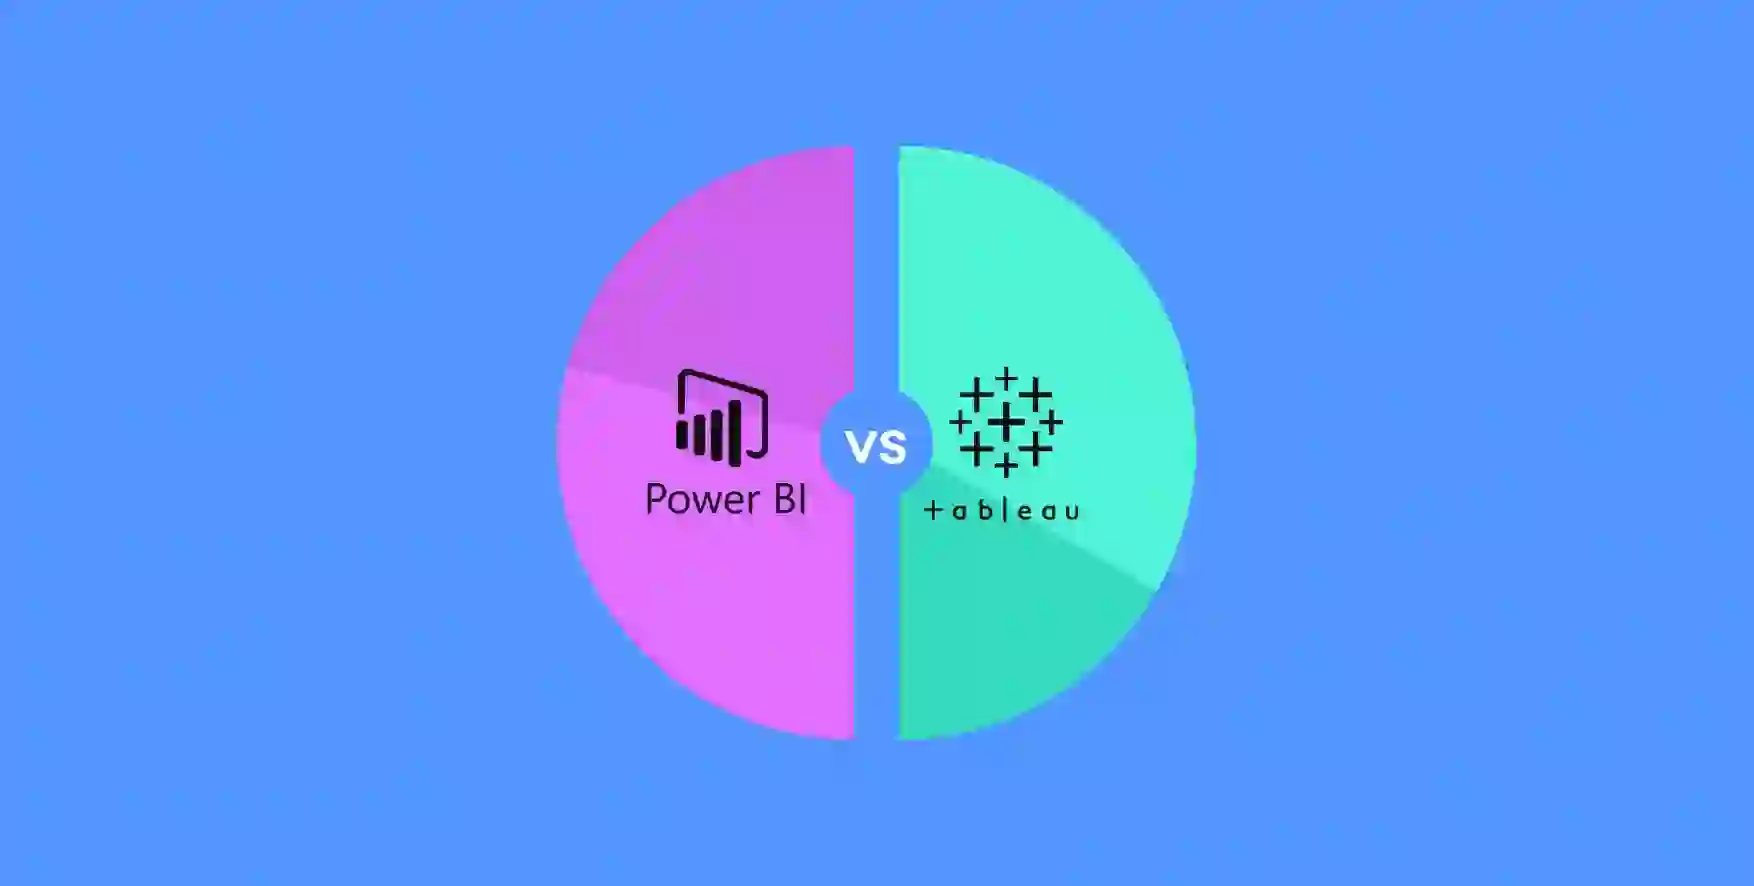 Power BI vs Tableau on two sides of the circle